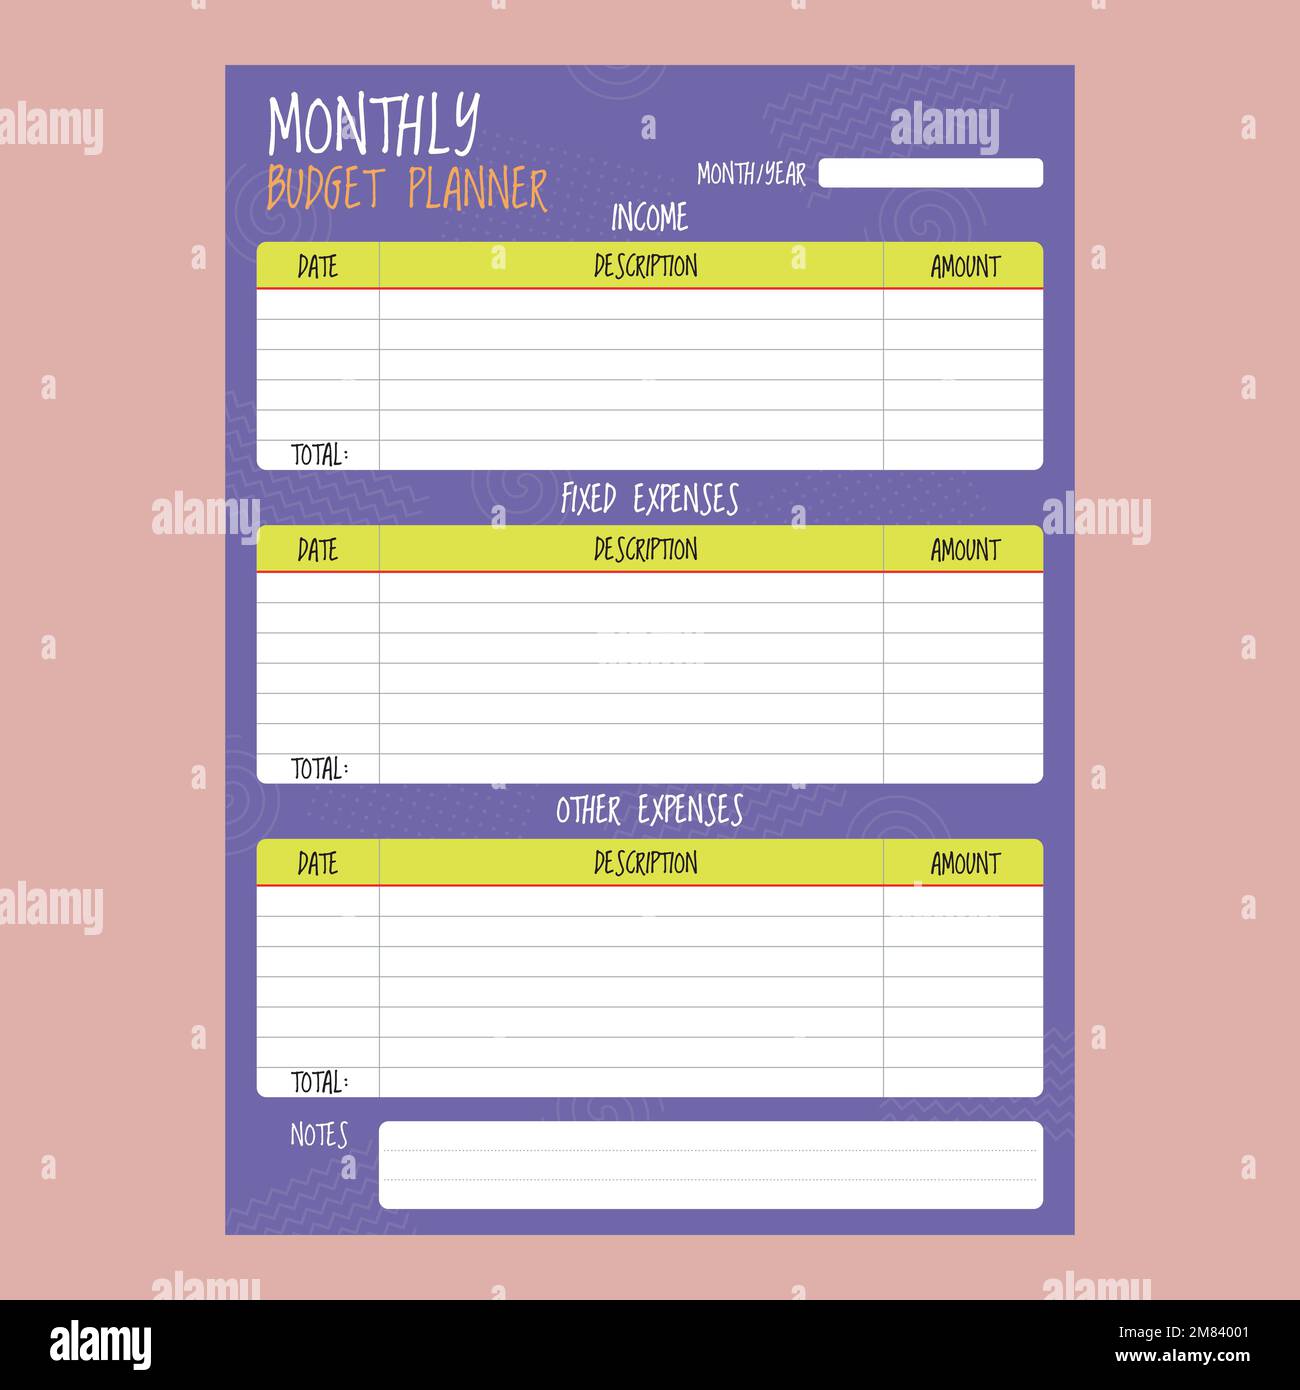 monthly budget planner with fun elements and bright colors Stock Vector